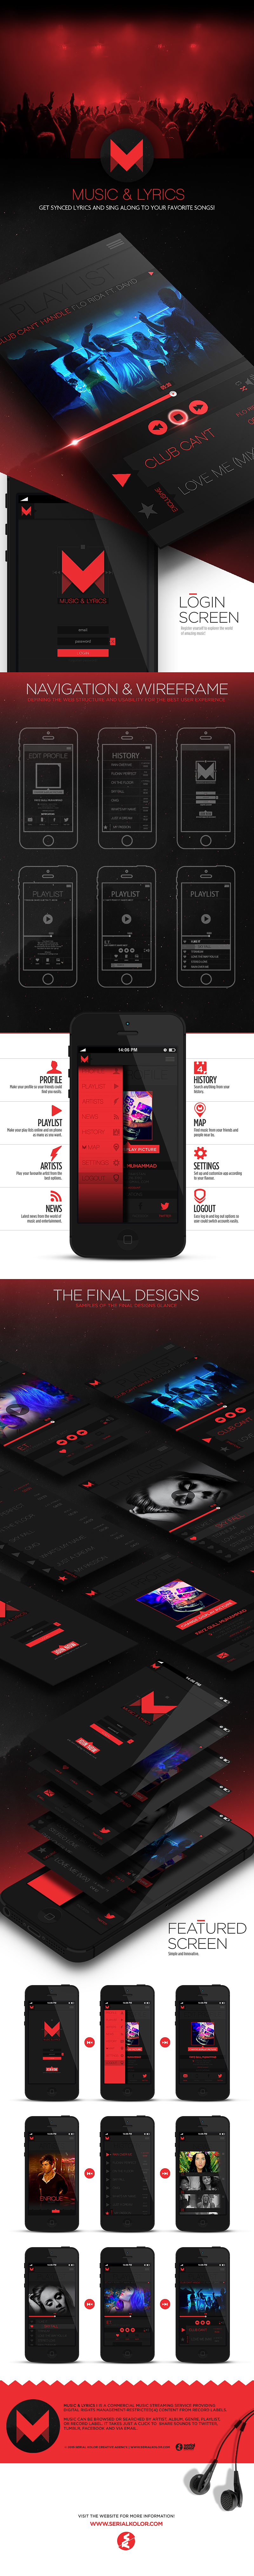 UI UIX design app Lyrics Musik red serialkolor fayz Theme wireframe mobile android ios iphone